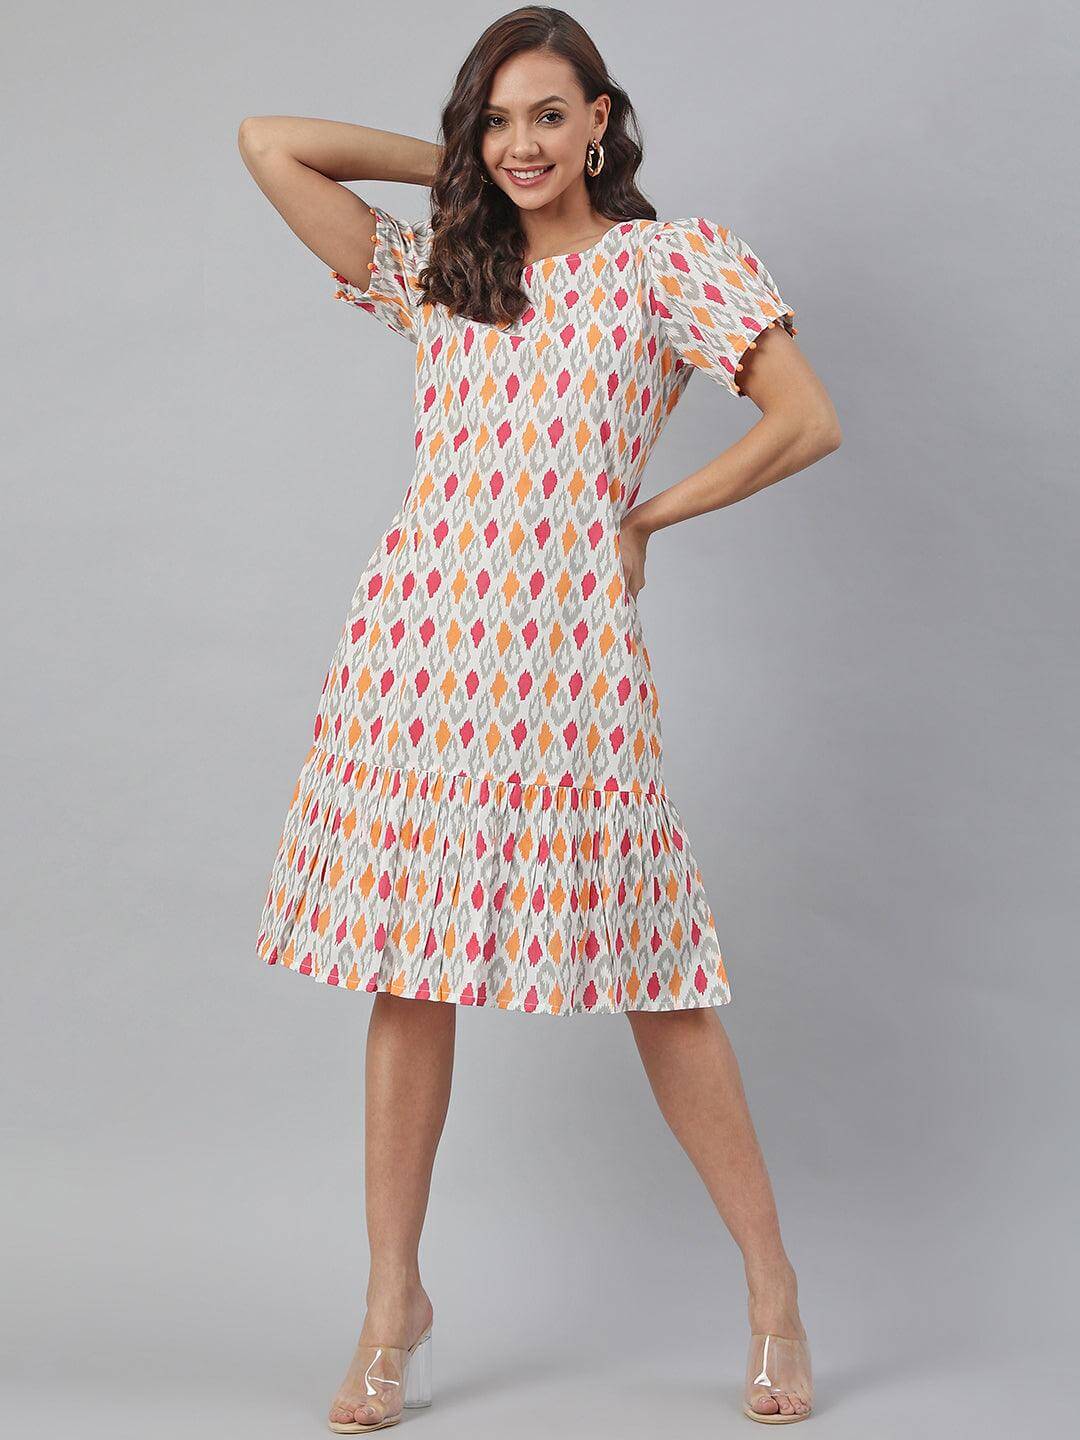 Off White Cotton Printed A-Line Western Dress